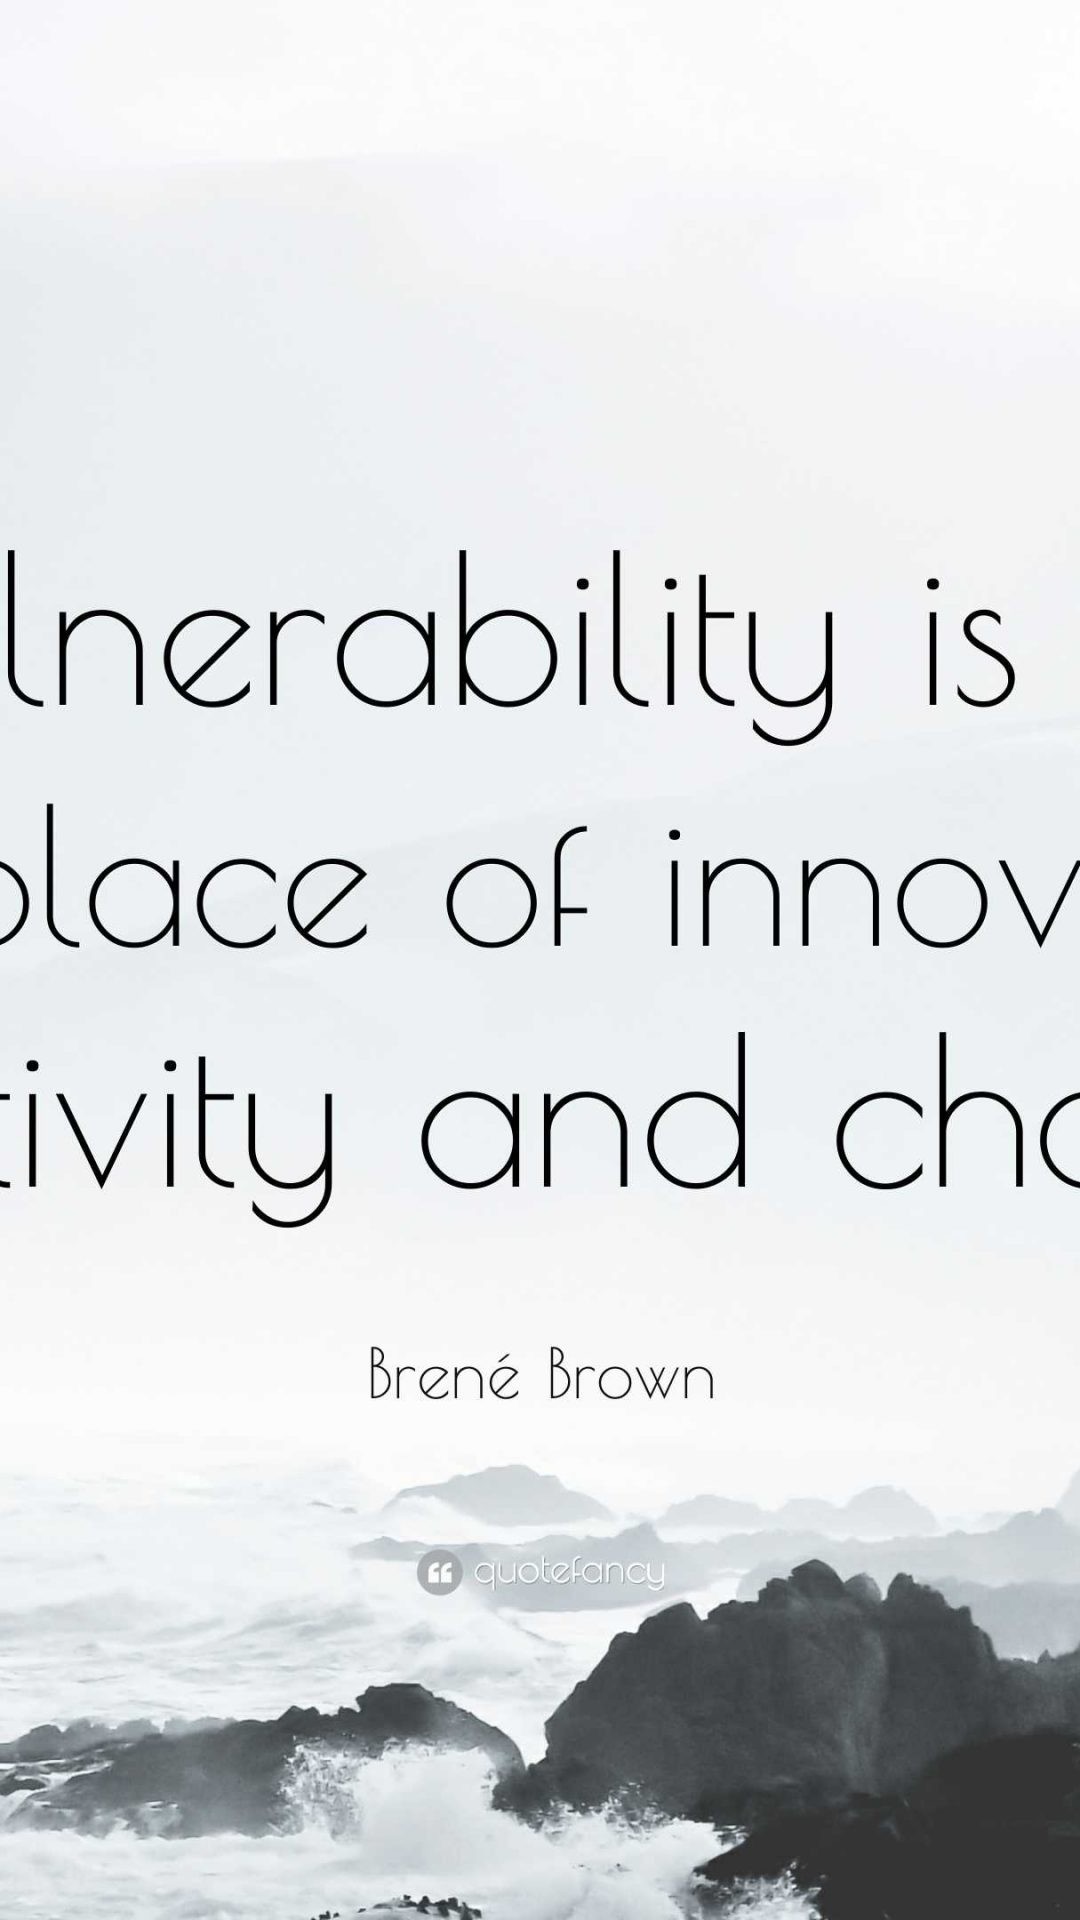 Inspirational quote wallpaper brene brown